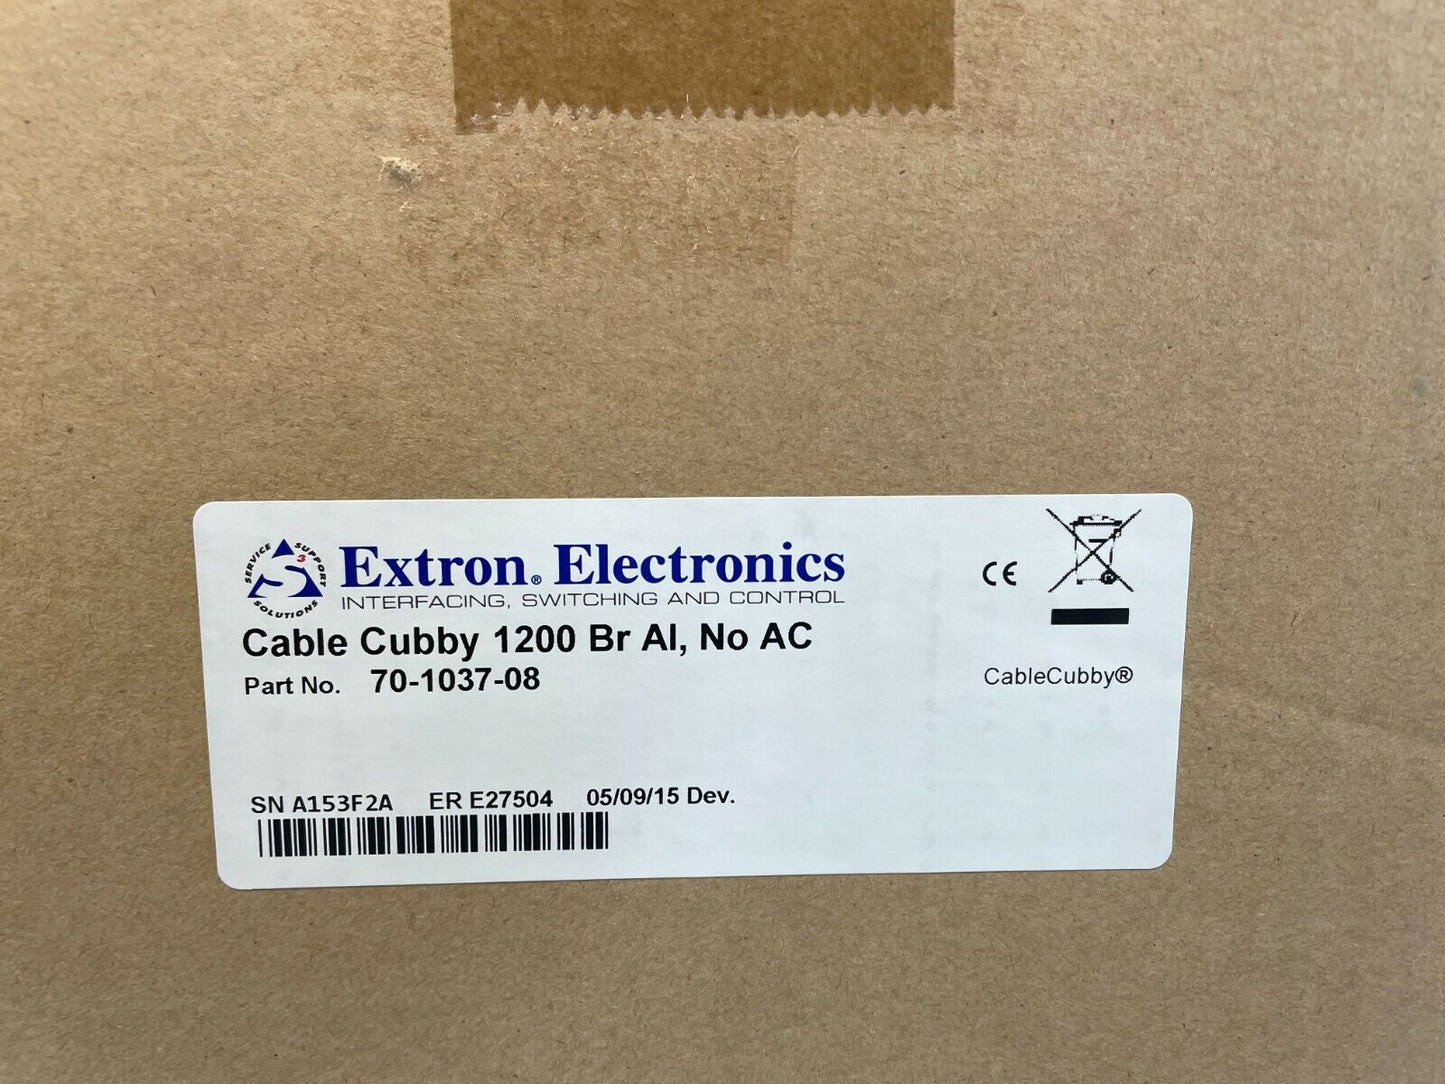 Extron Cable Cubby 1200 Series/2 Cable Access Enclosure w/US AC Power Module